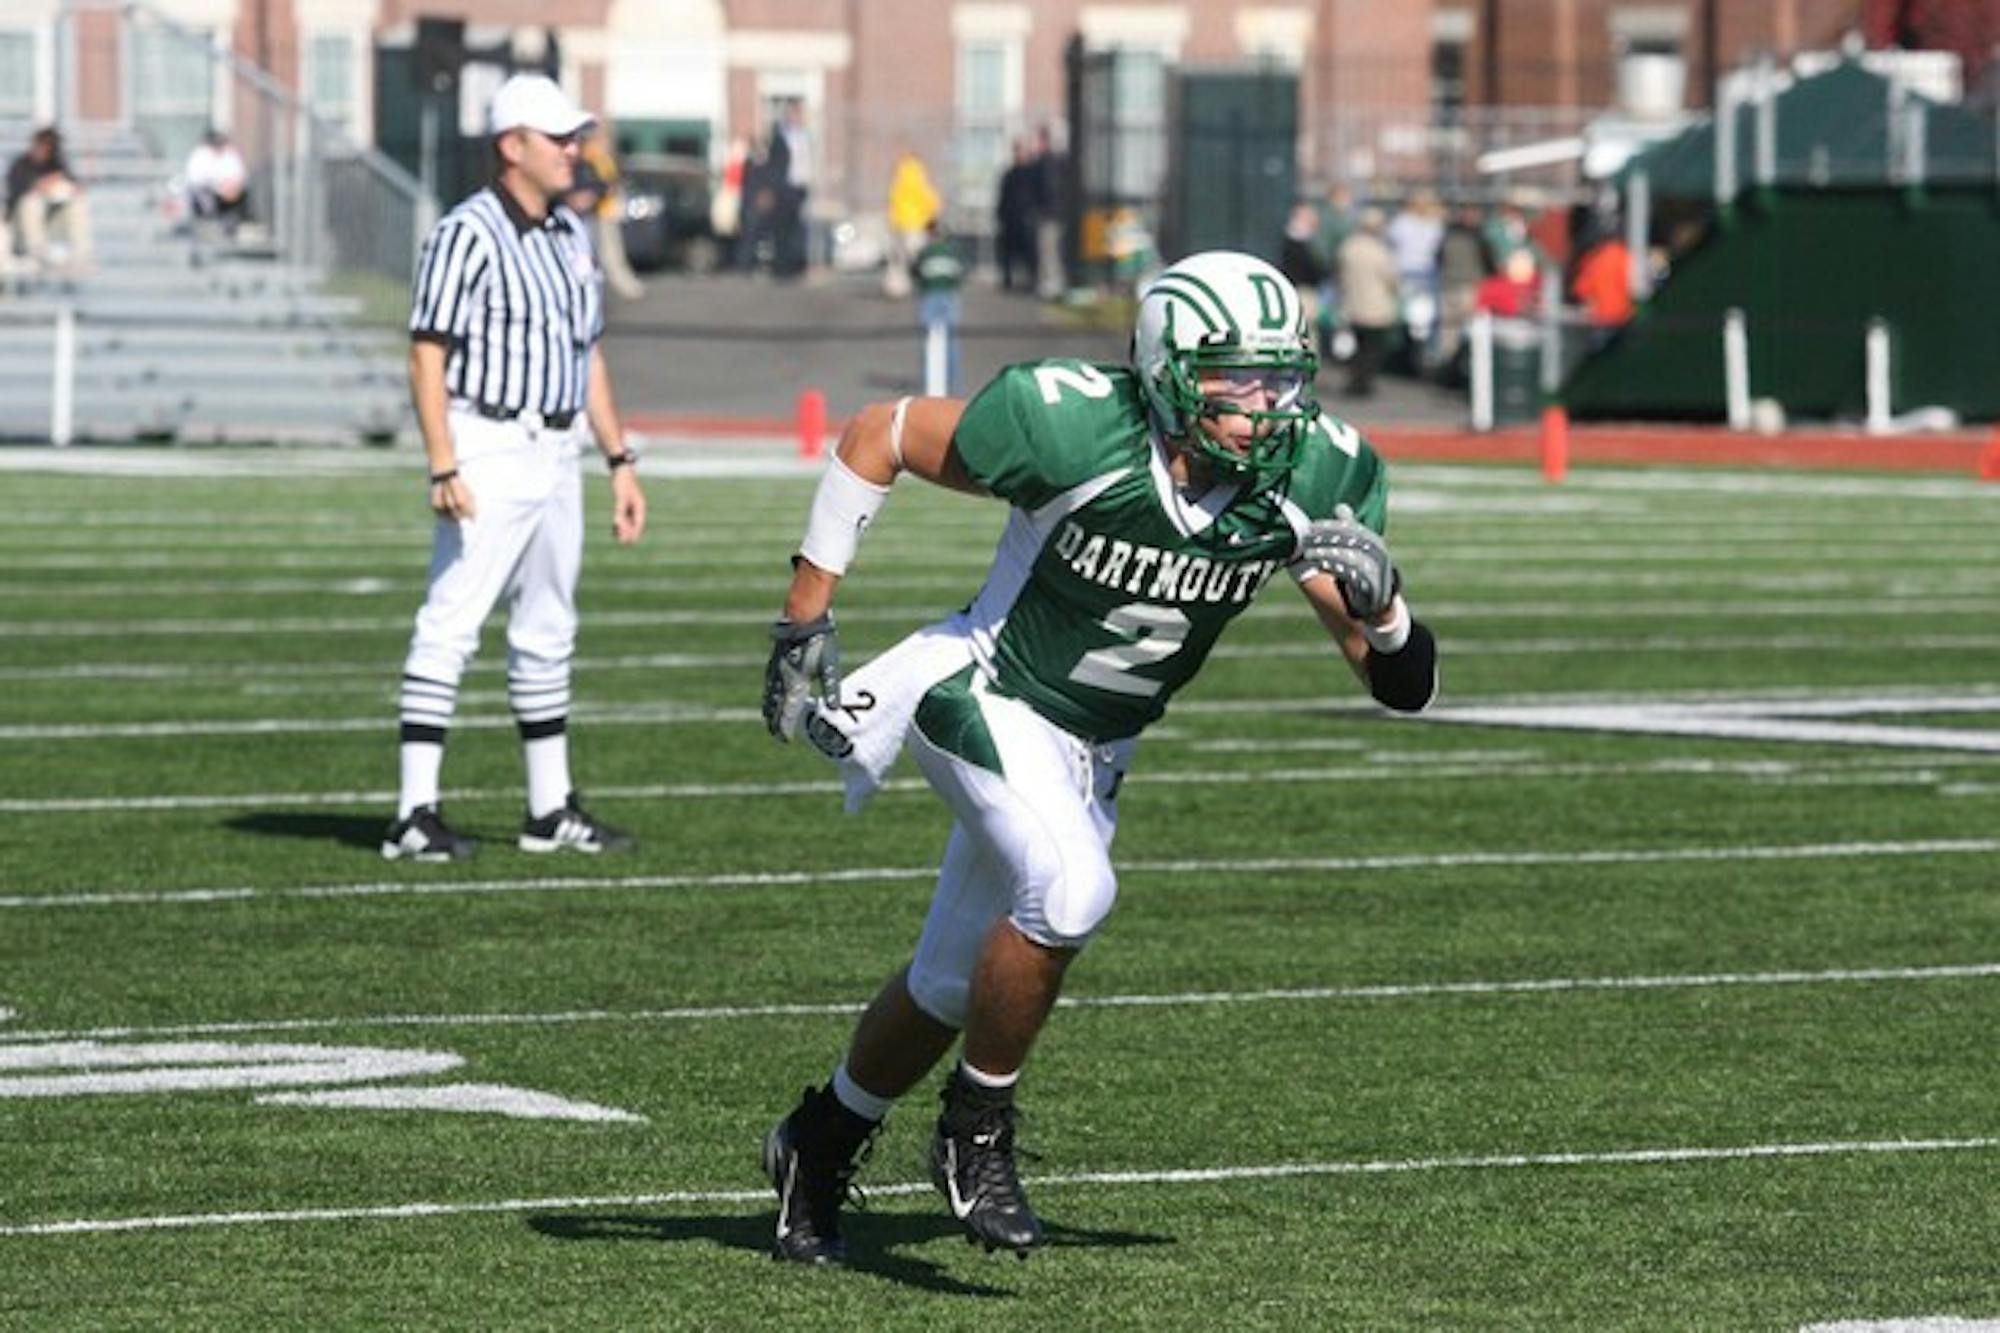 Tim McManus '11 was all over the field for Dartmouth Saturday, gaining yards passing, rushing and receiving.